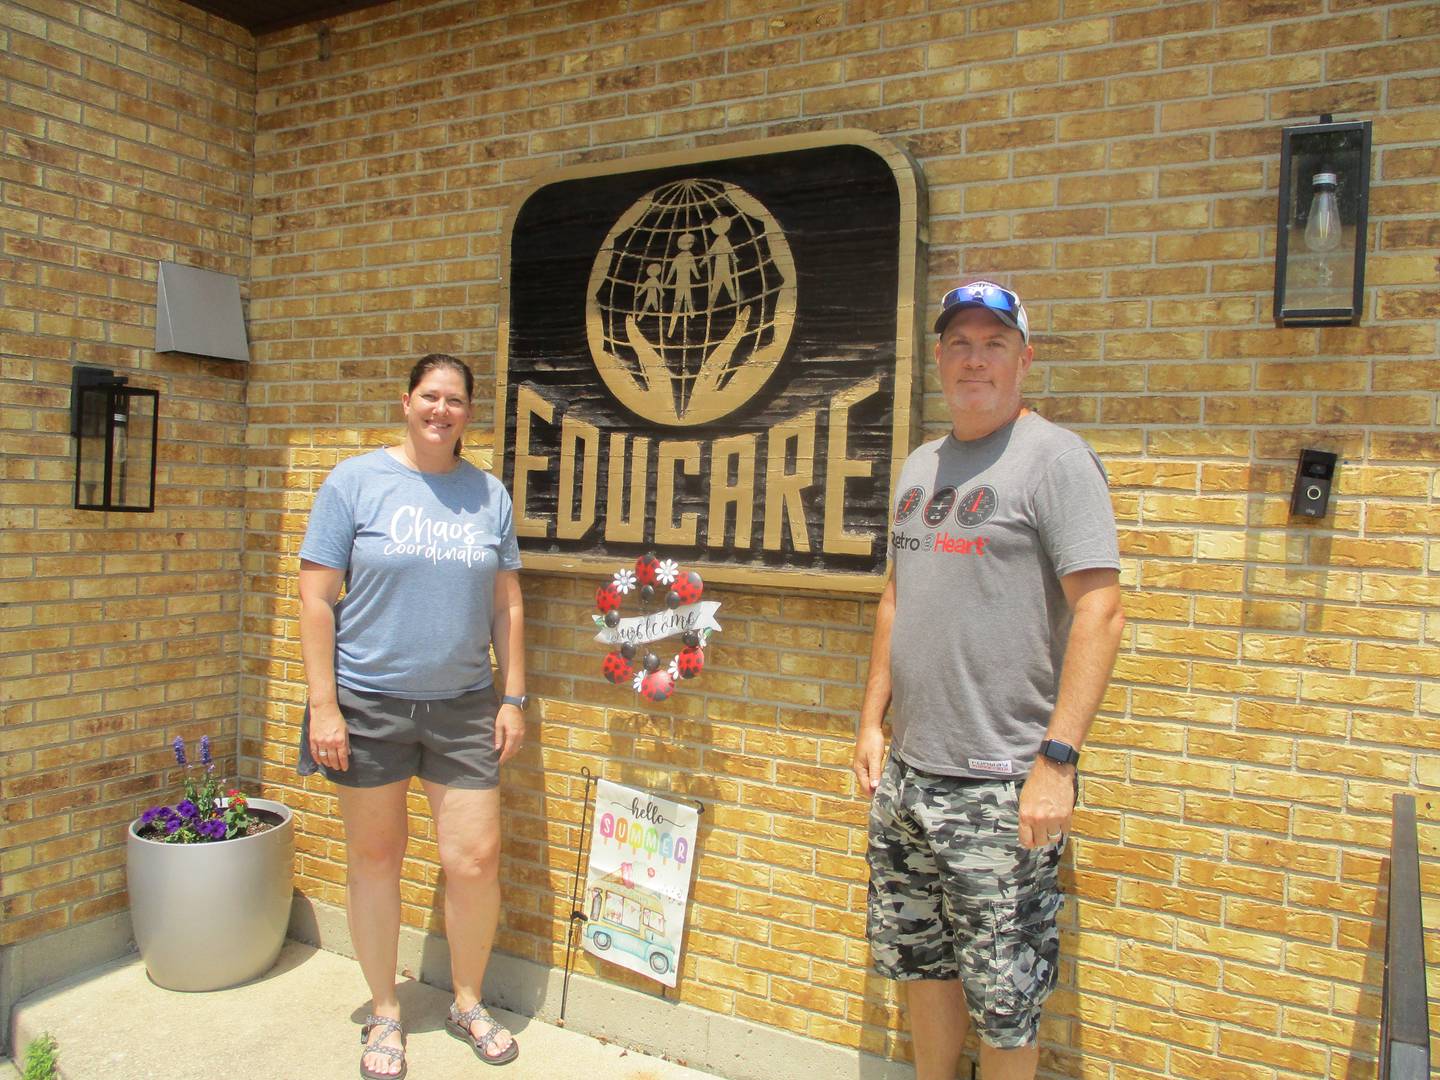 Stephanie and David Collom own the EduCare preschool on Thomas Hickey Drive in Joliet. They are concerned about the impact of a Starbucks restaurant with drive-thru that would be built next door. June 7, 2023.